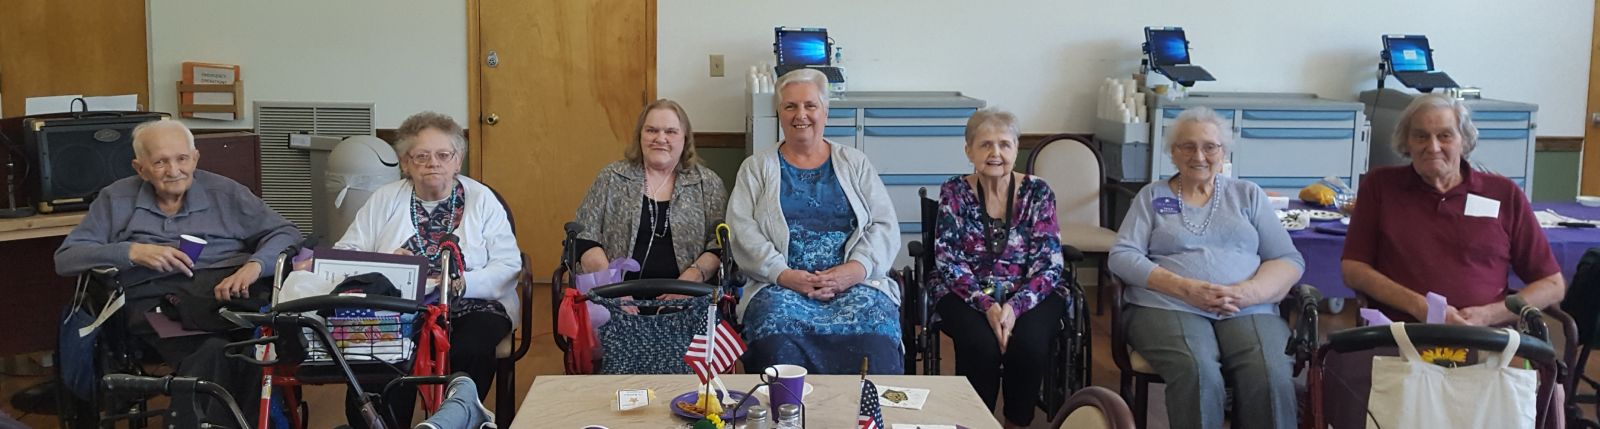 June 20, 2018  Chambersburg, PA  The Franklin County Area Agency on Aging conducts Pennsylvanias Empowered Expert Residents (PEER) training sessions at Michaux Manor Living Center located in Fayetteville, PA.  The PEER program encourages a partnership between residents and facility staff to work together to solve concerns before they become more intense problems.  Were so pleased to have the participation of Michaux Manors residents and the support of its staff.  The PEER program helps to ensure the health, safety and well-being of our older residents, said Dave Keller, Chairman, Franklin County Board of Commissioners.  The PEER program trains resident advocates to work with facilities, staff, and residents to enhance quality of care and quality of life for their peers.  The program was initiated in 2002 by the Pennsylvania State Long-Term Care Ombudsmans Office in an effort to assist long-term care residents in volunteering their time and expertise to self-advocate issues that will resonate for their peers.  Program participants attend five two-hour training sessions which include topics such as The Focus is on YOU, Building Self-Resolution Skills, and PEER the Skys the Limit.  There is also a two-hour session for facility staff to orient them to the PEER concept.  Following the completion of the training sessions, PEER participants have a graduation ceremony to celebrate completion of the program.  The PEERs are awarded with a certificate, a starfish pin, a door sign, and a badge.  On June 14, 2018, seven participants graduated from the PEER Program at Michaux Manor Living Center. PEER Program graduates, from left to right: John Feiser, Debbie Jo Freeman, Elaine L. Piper, Mary Jane Hensen, Carole Downing, Ann Benshoff, Parker H. Moore 